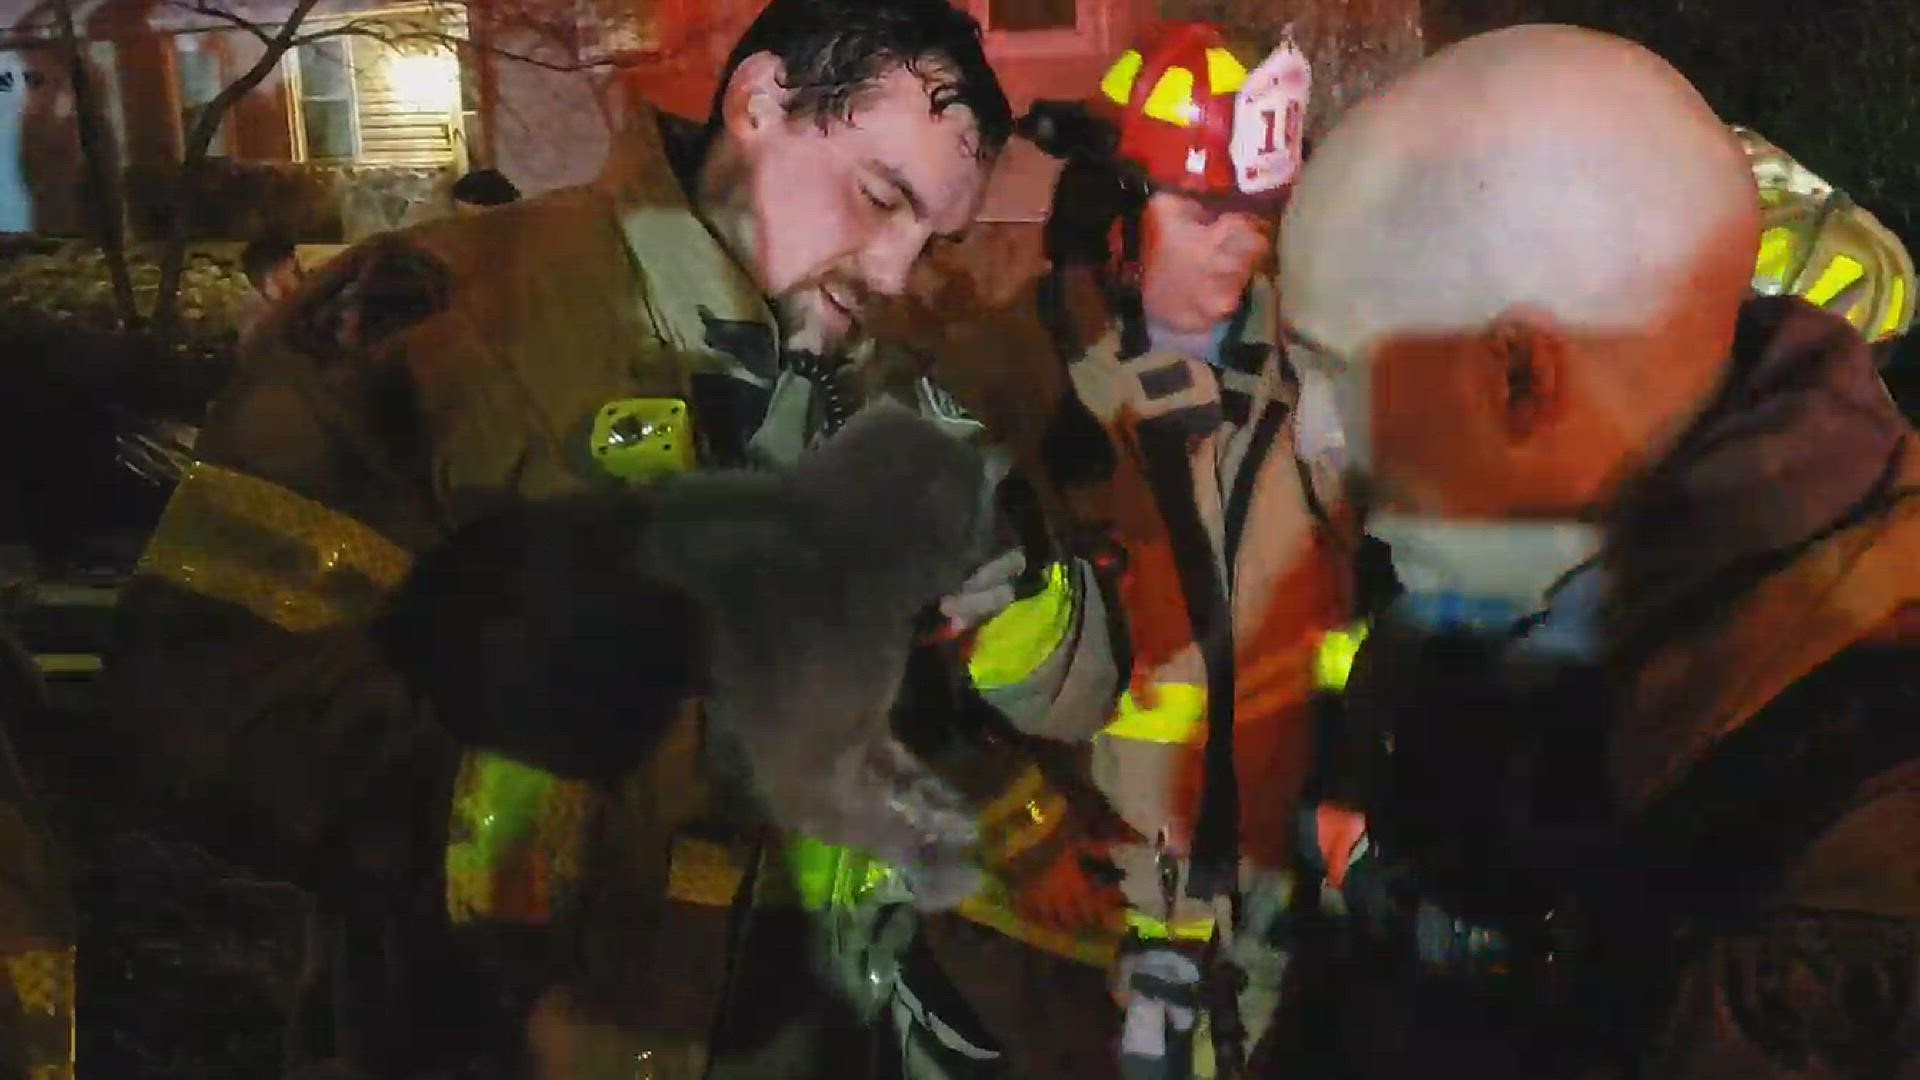 Rural Metro saved both a dog and a cat in the house fire.